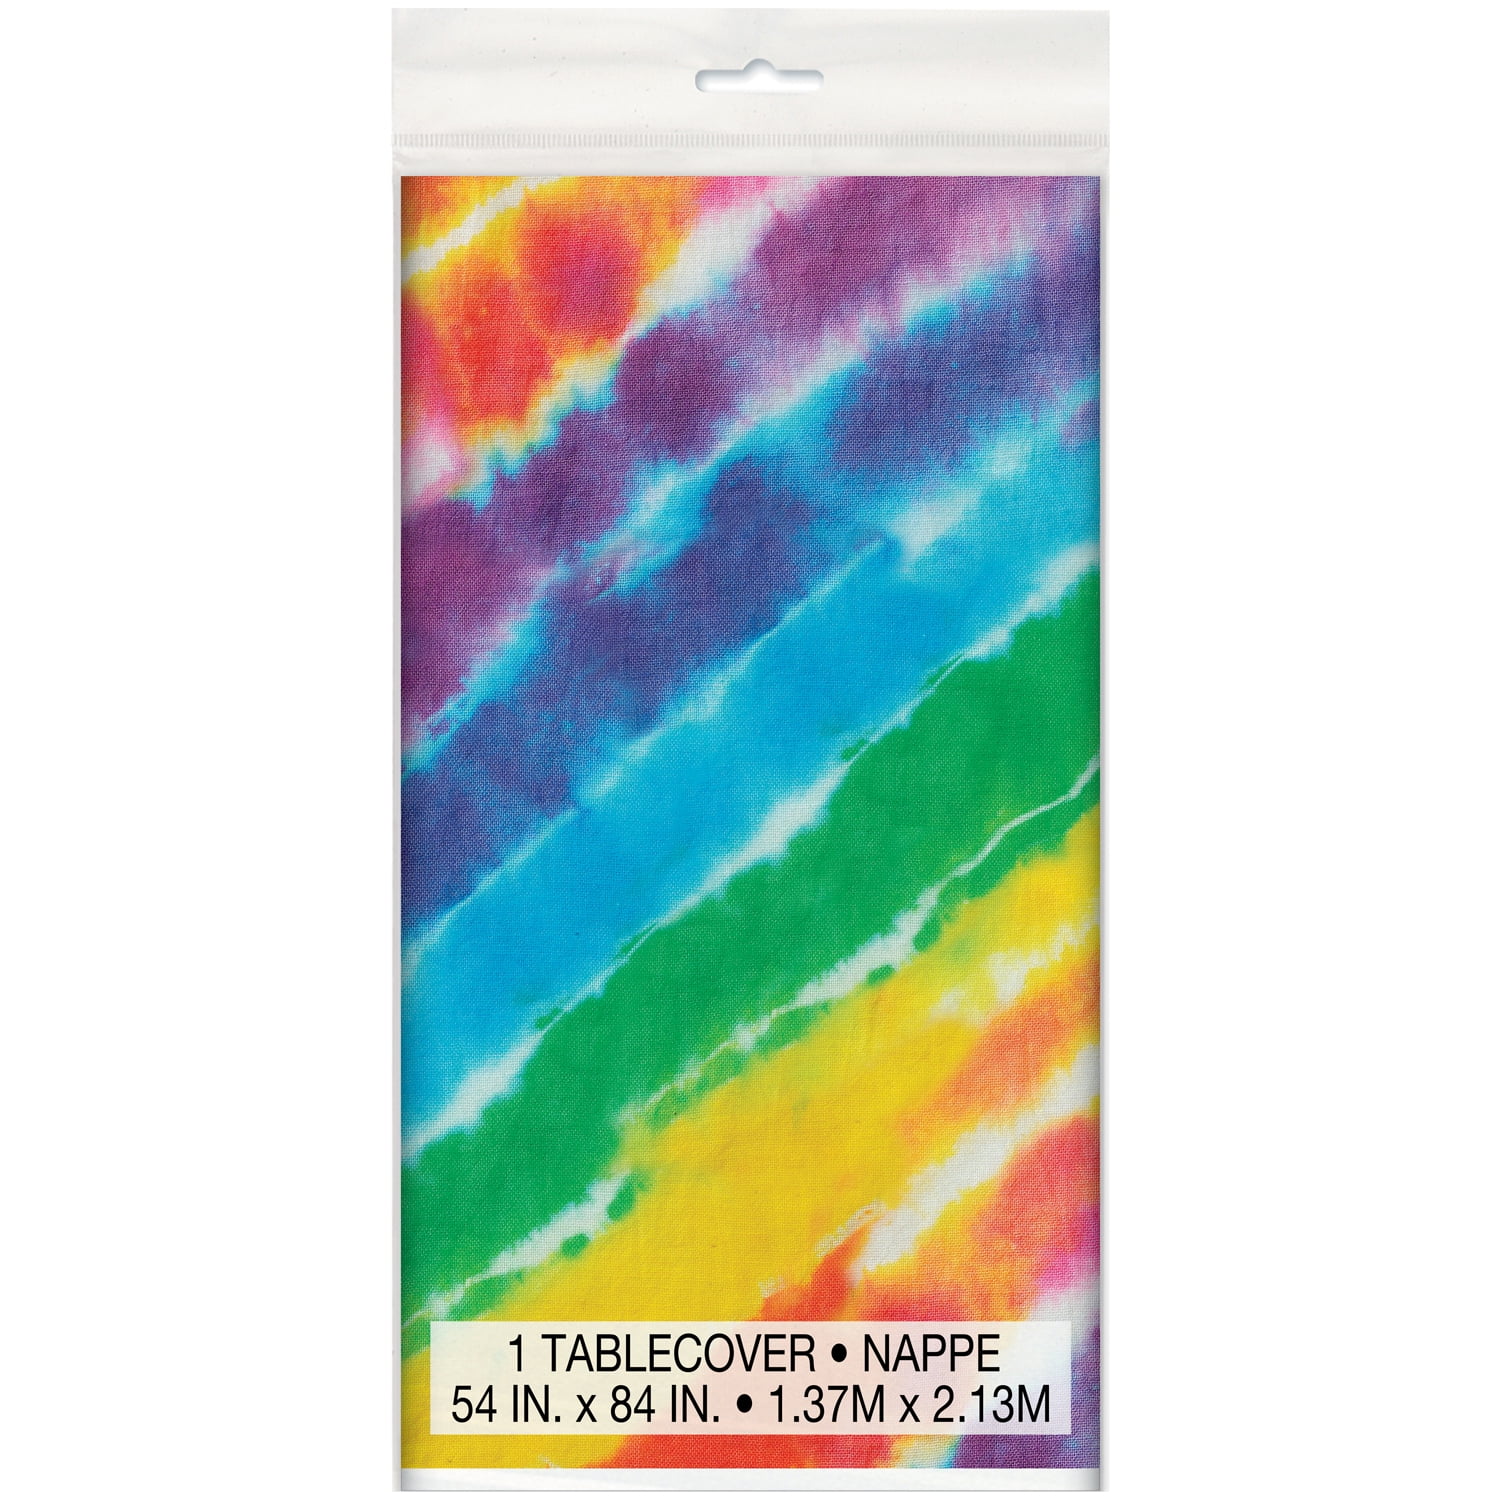 Rainbow Table Cover Disposable Plastic Tablecloth Rectangular Colorful Tablecovers for Tie Dye Party Supplies Kitchen Dining Picnic Decoration VGMANNTA 3 PCS Tie Dye Tablecloths Tie Dye Table Covers 